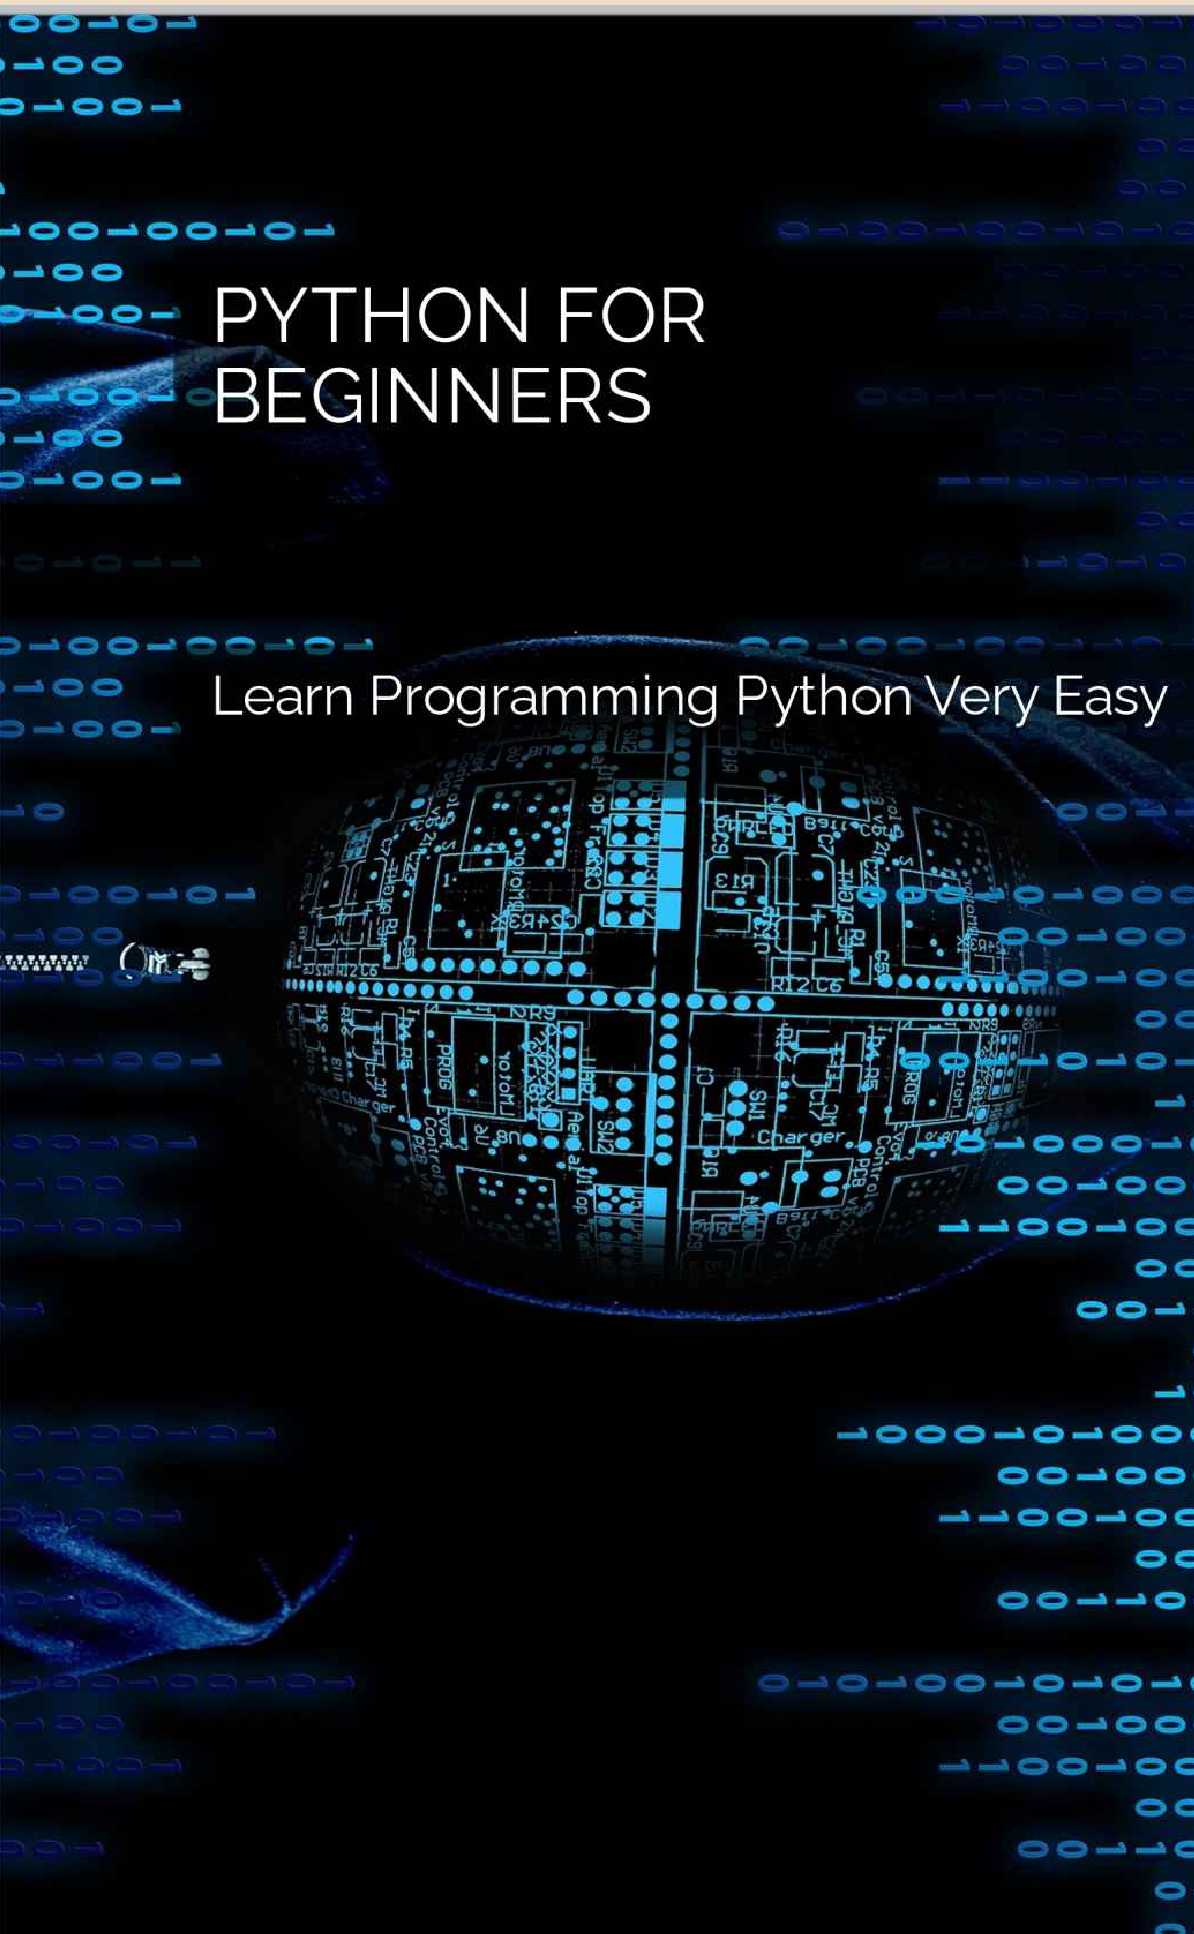 Python for Beginners: Learn Programming Python Very Easy